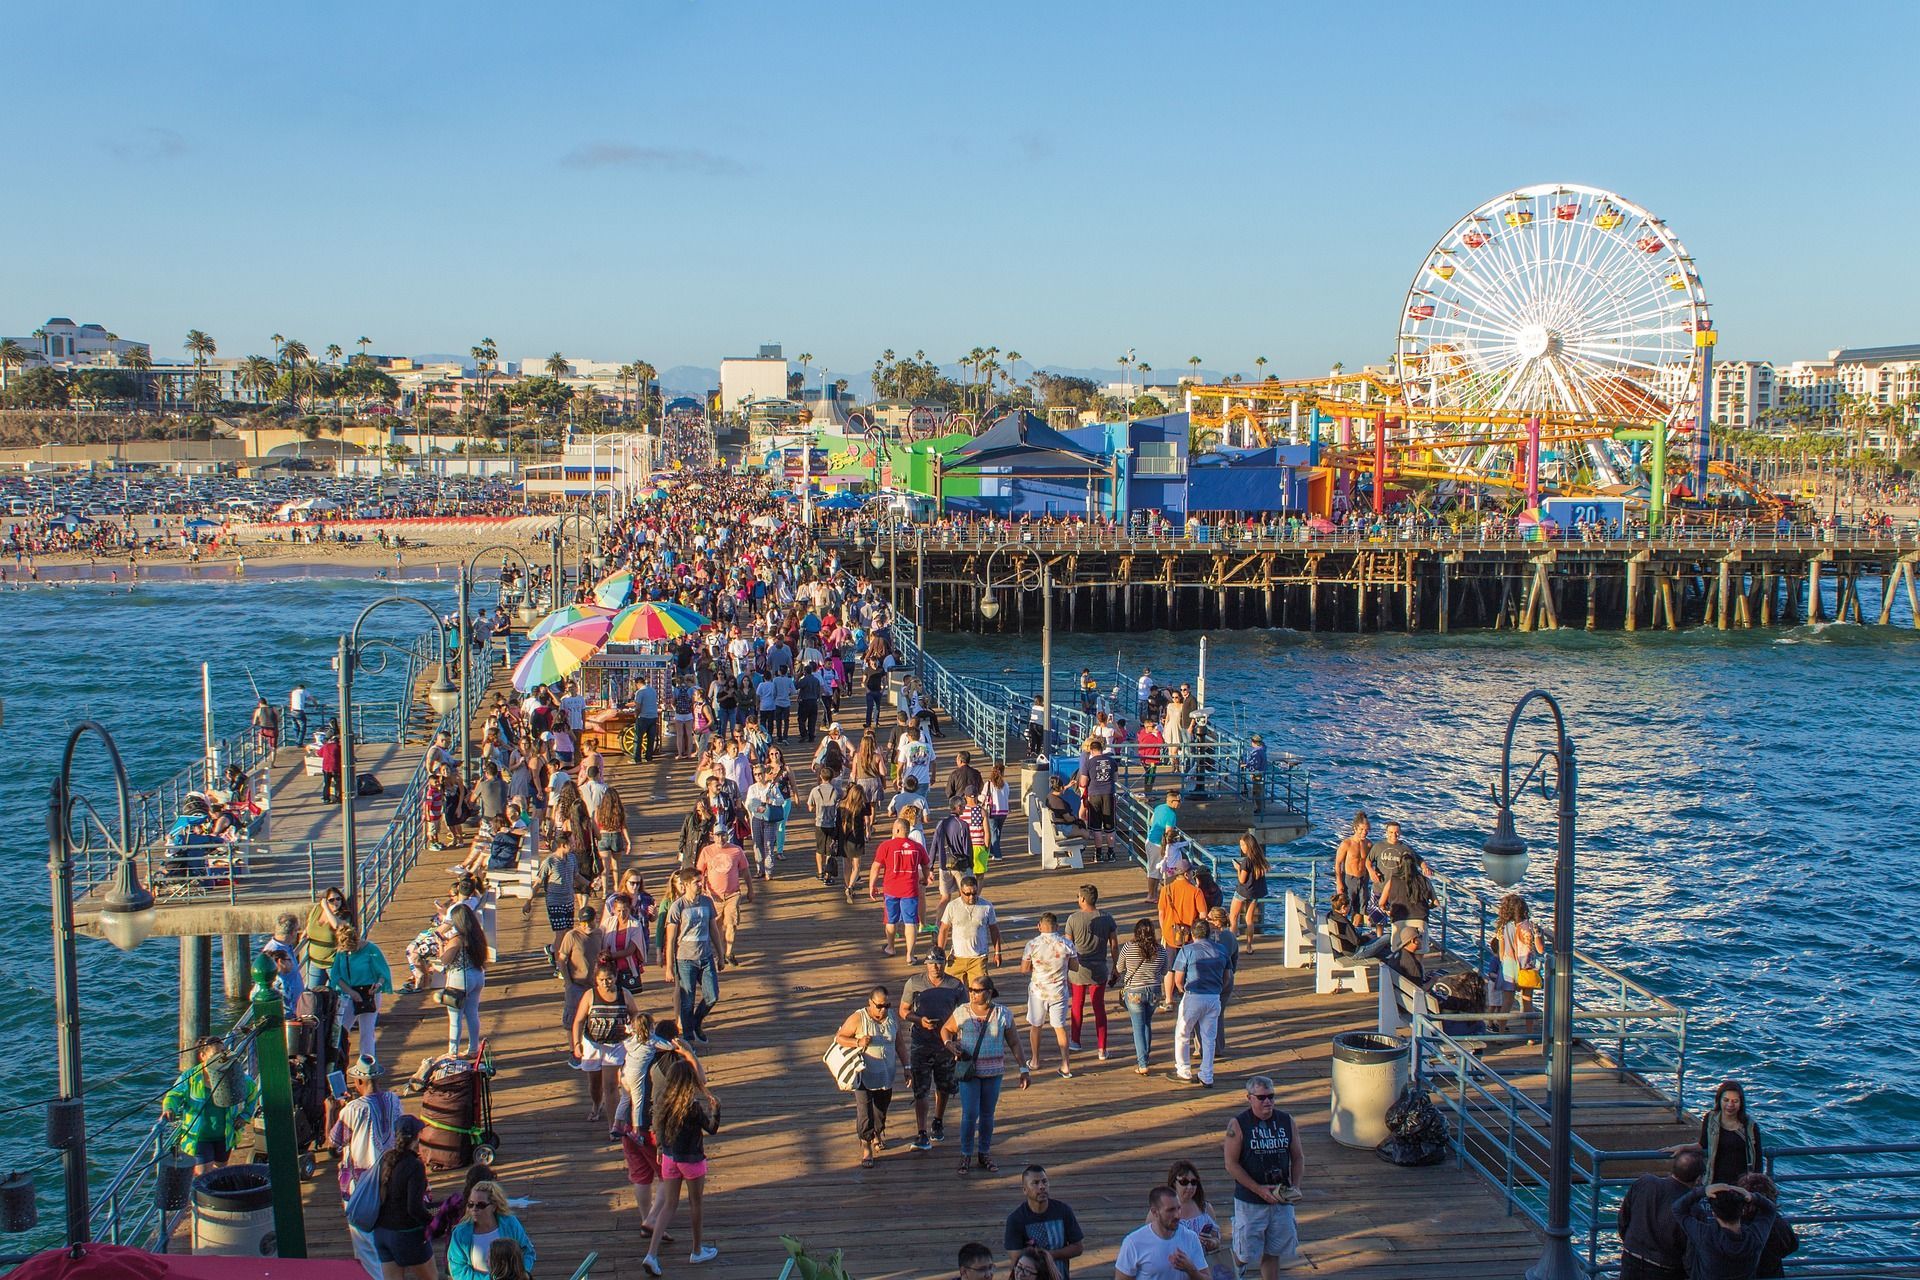 Get To Know Each Other While Strolling Along The Santa Monica Pier And Enjoy Ocean Views